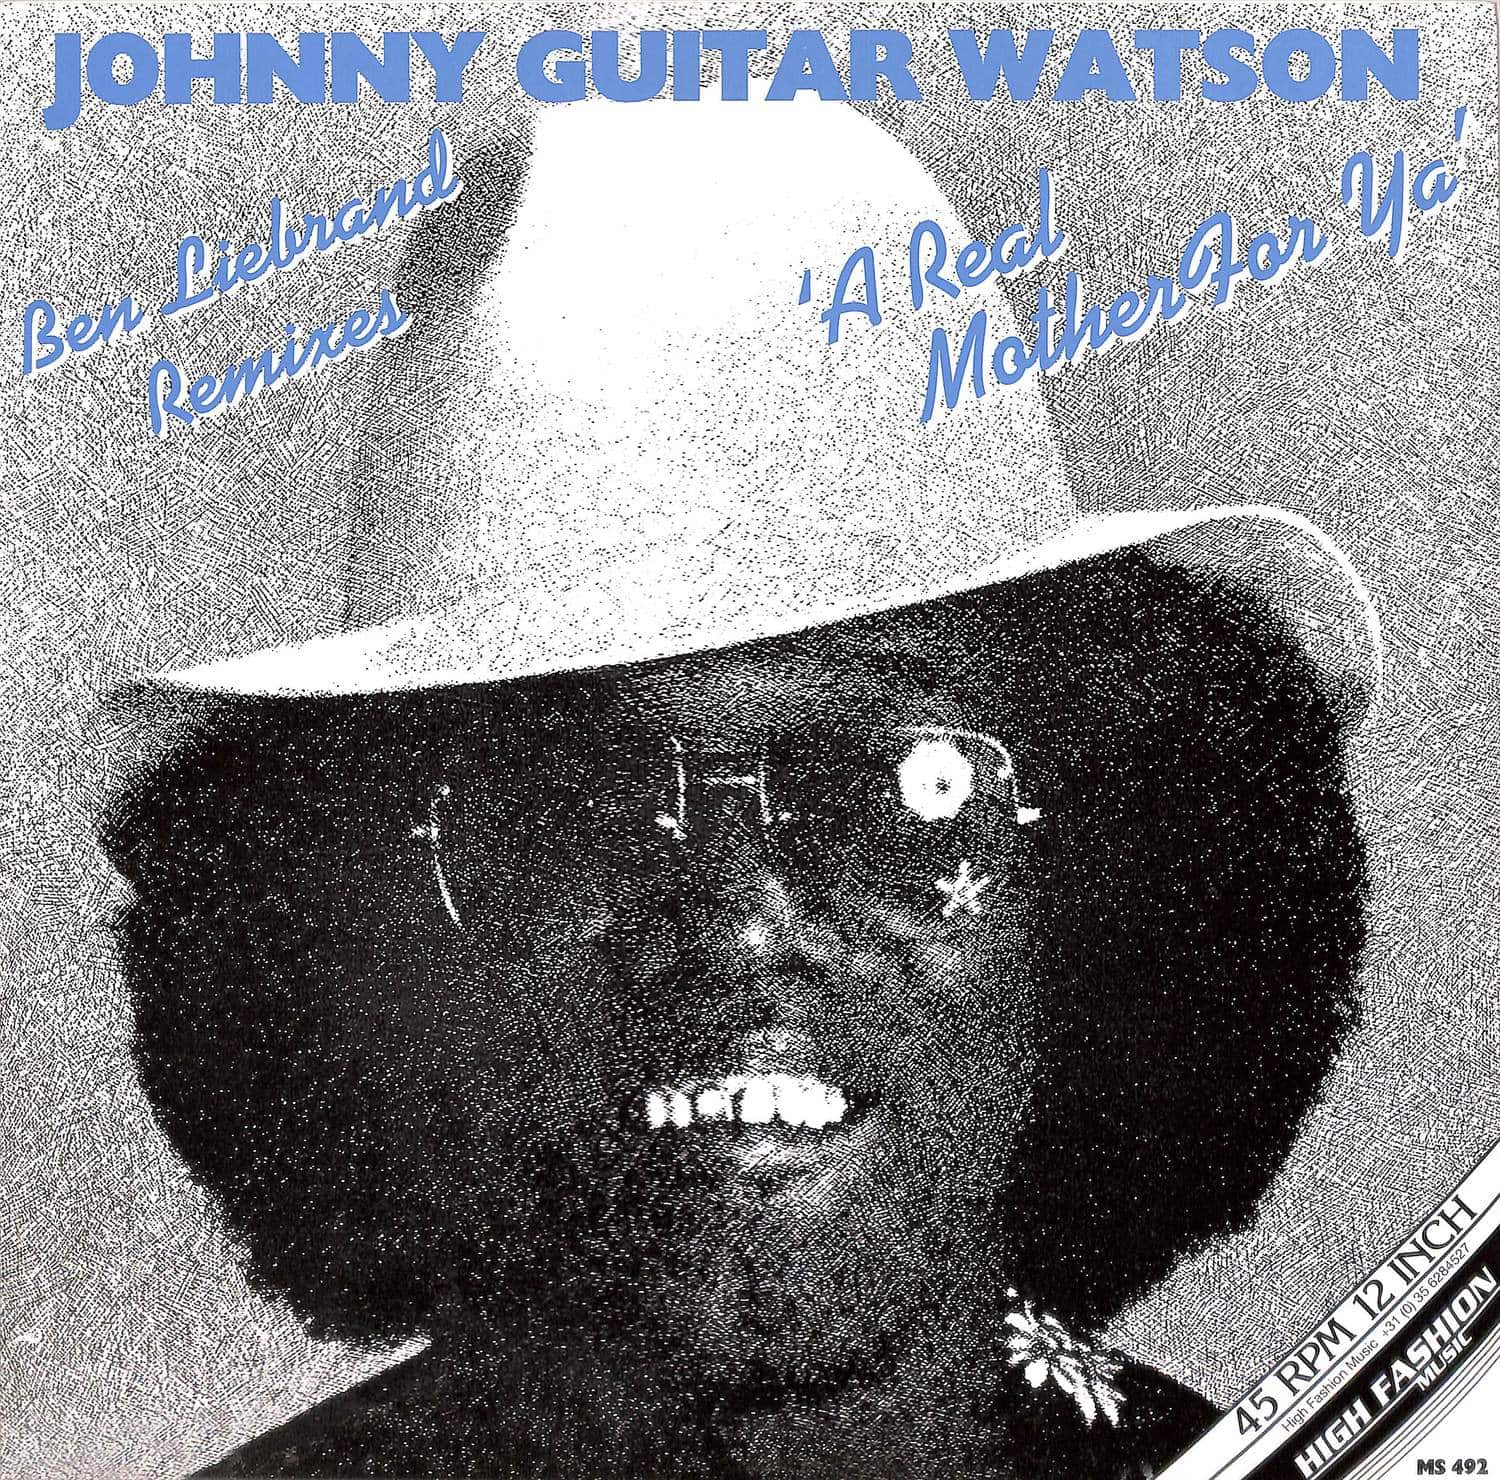 Johnny Guitar Watson - A REAL MOTHER FOR YA 